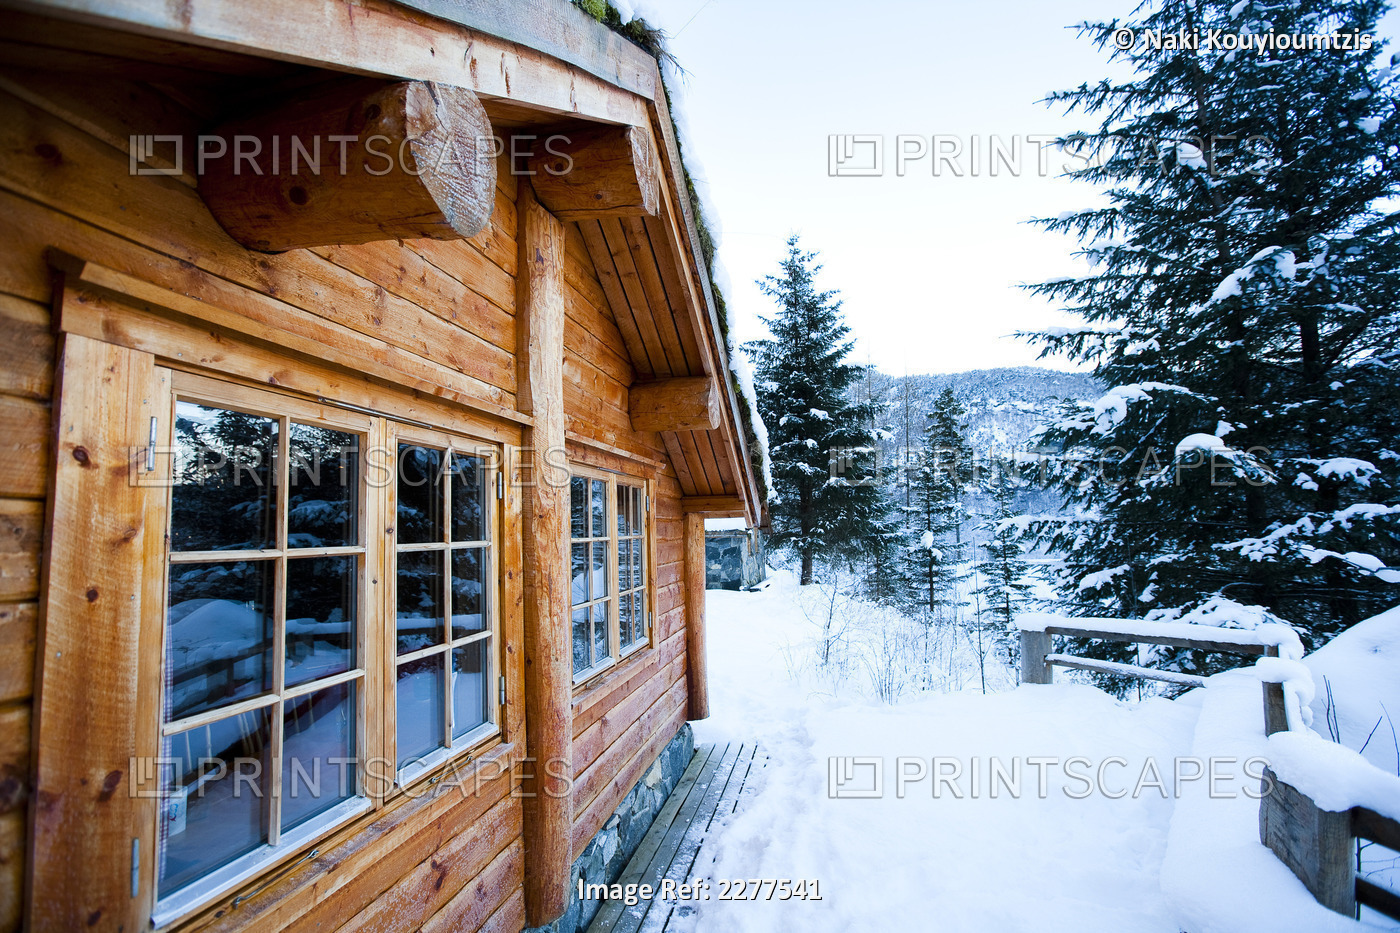 Winter Alpine Scenery With Mountains, Snow And A Pine Forest With Brekke Rental ...